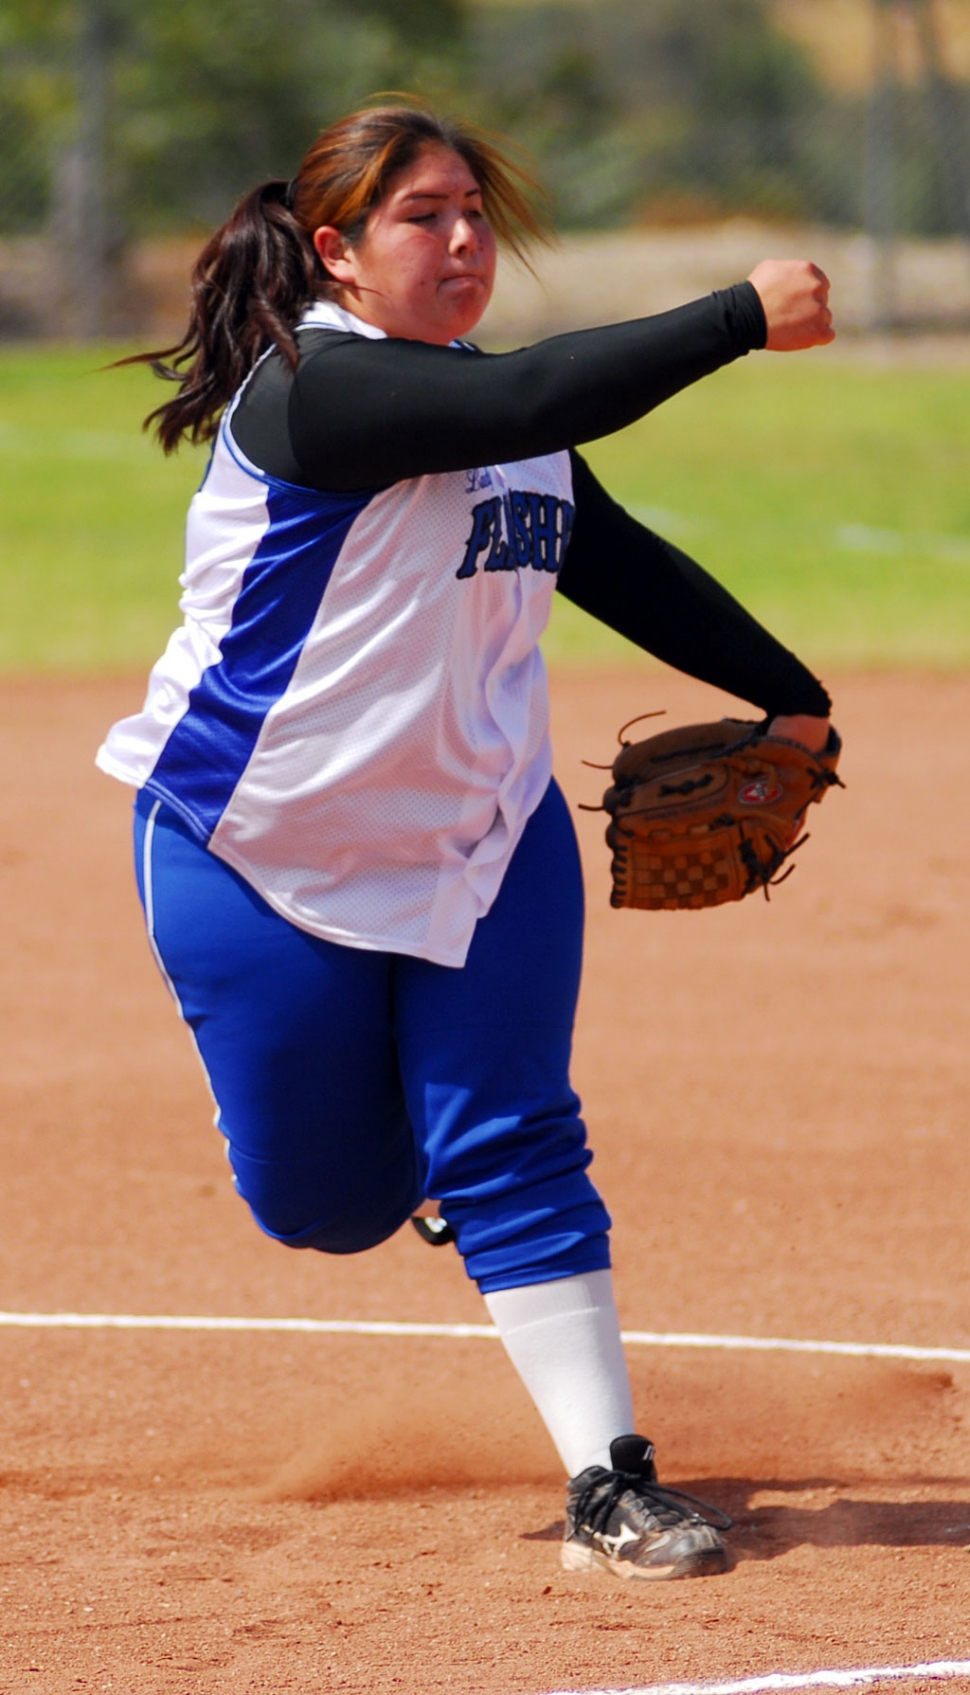 Breanna Martinez pitched a great game against Carpinteria last Thursday in Fillmore’s last game in league.